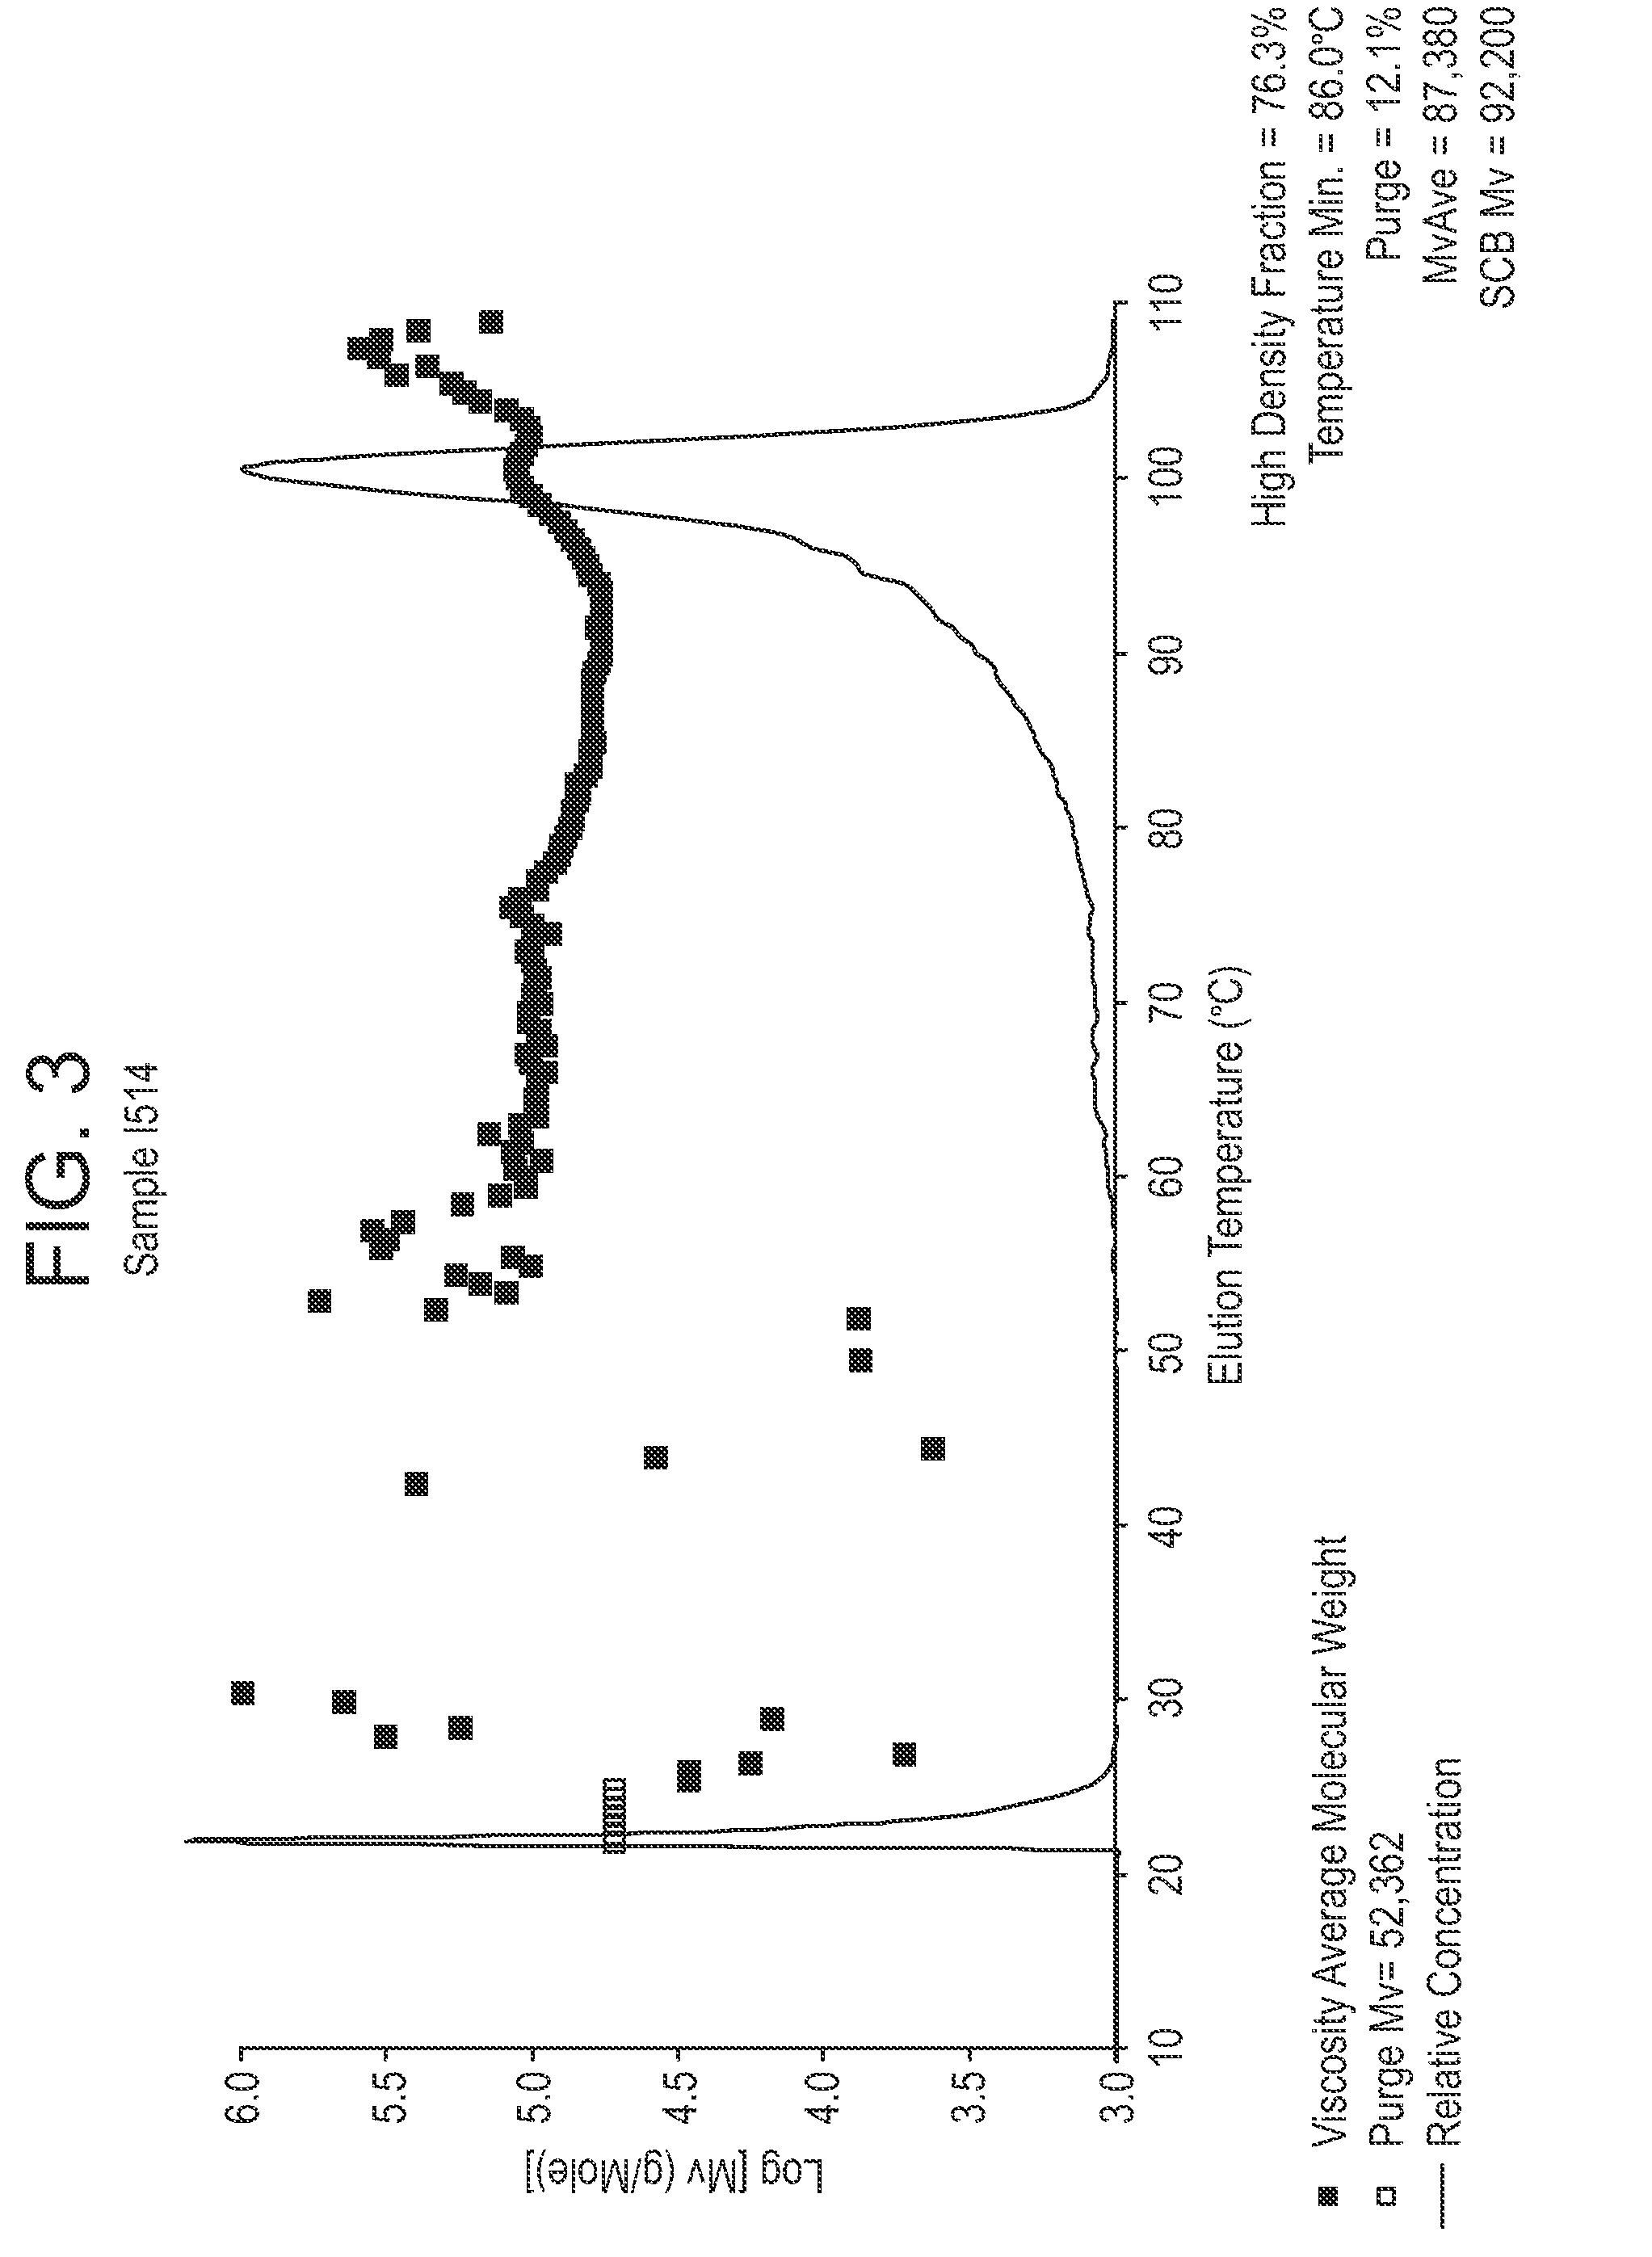 Polyethylene compositions, methods of making the same, and articles prepared therefrom